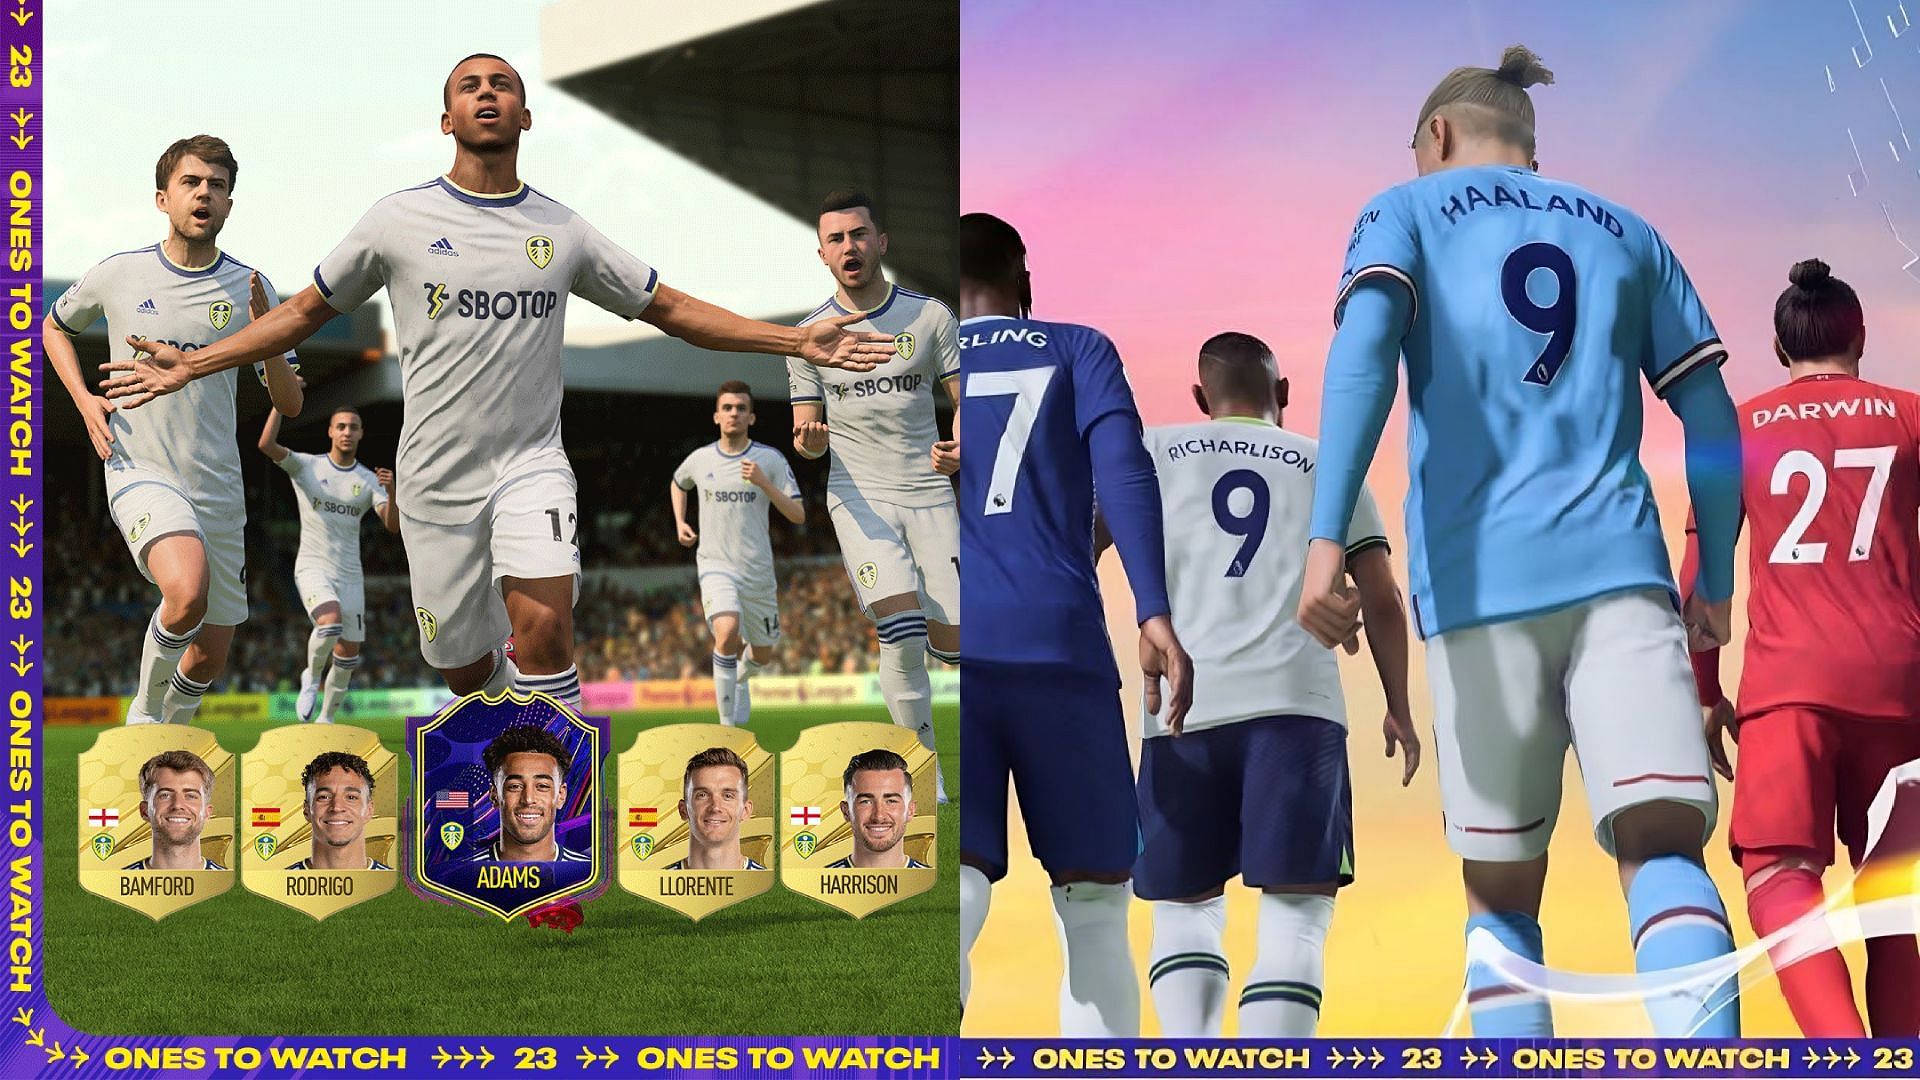 Which Ones to Watch  cards are good in FIFA 23 FUT? (Image via EA Sports FIFA)